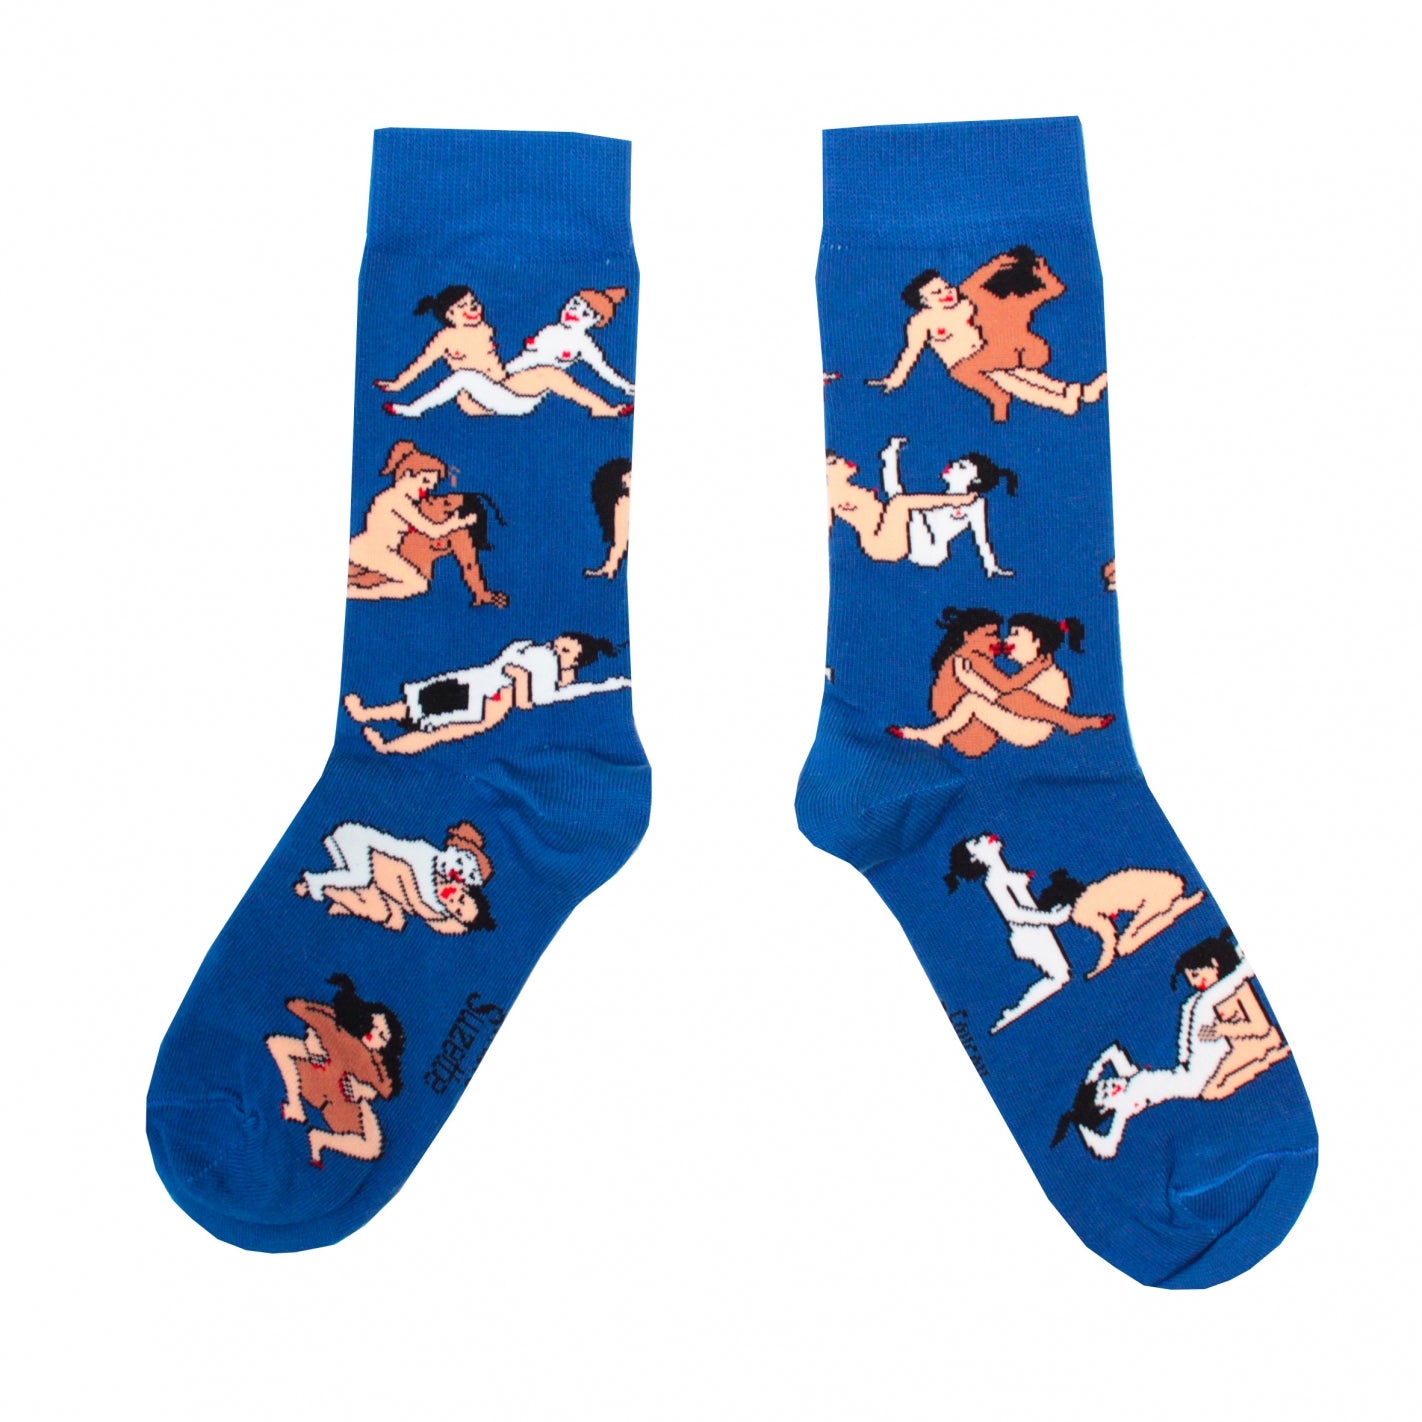 Shown in a flatlay, a pair of women's CouCou Suzette cotton crew socks in deep blue with lesbian lovers engaging in varying Kama Sutra sex positions all over the socks.